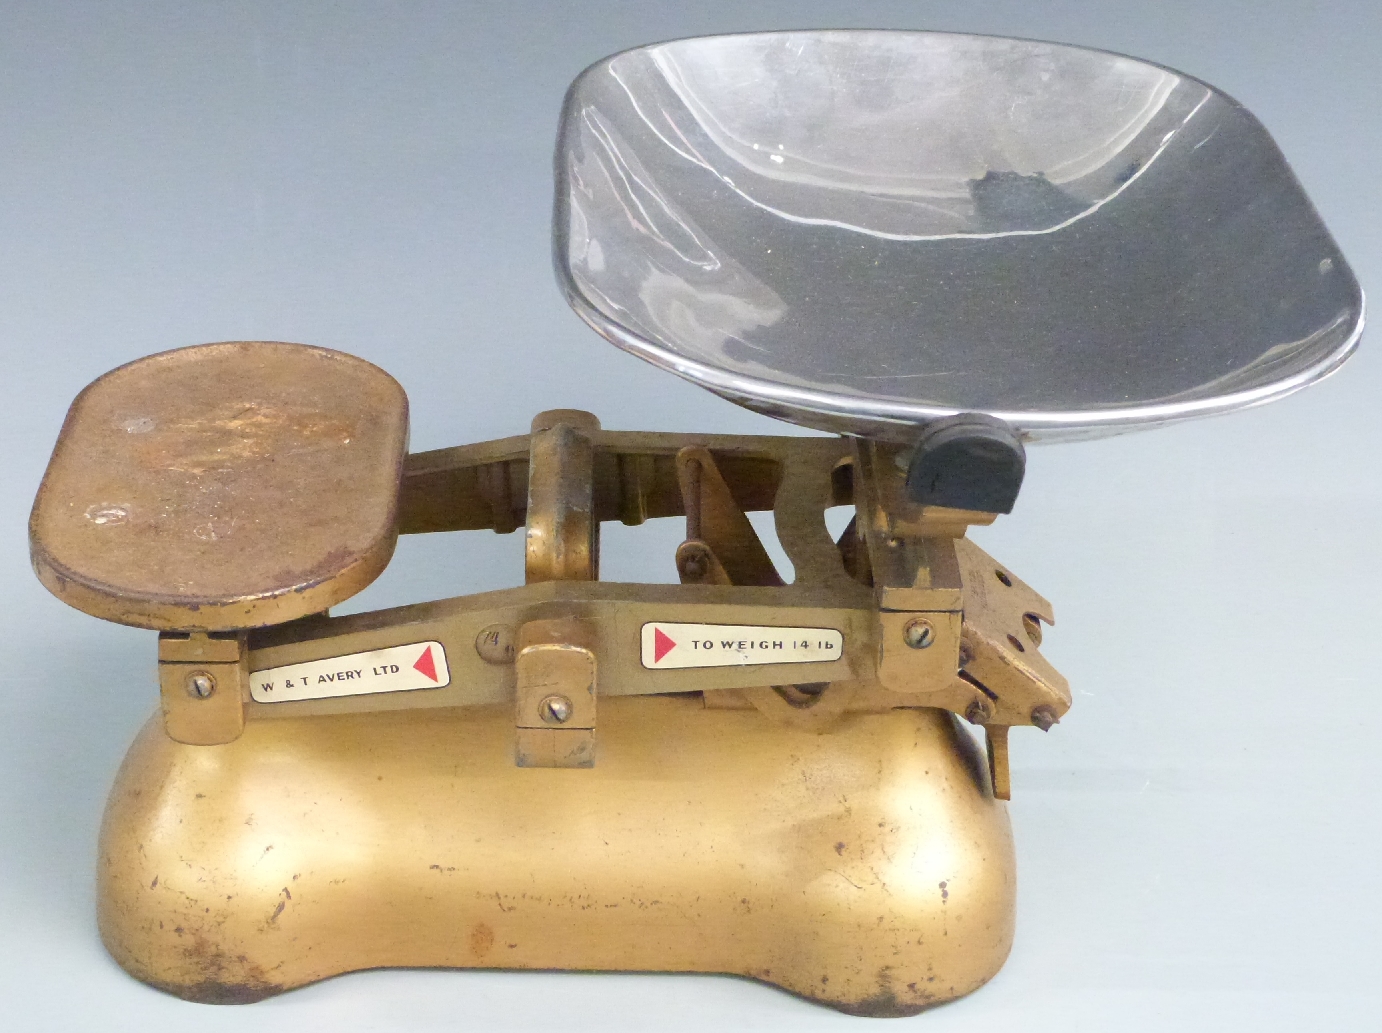 W & T Avery Ltd scales, a set of Perry portable scales and a stack of weights, ex Monmouthshire - Image 5 of 9